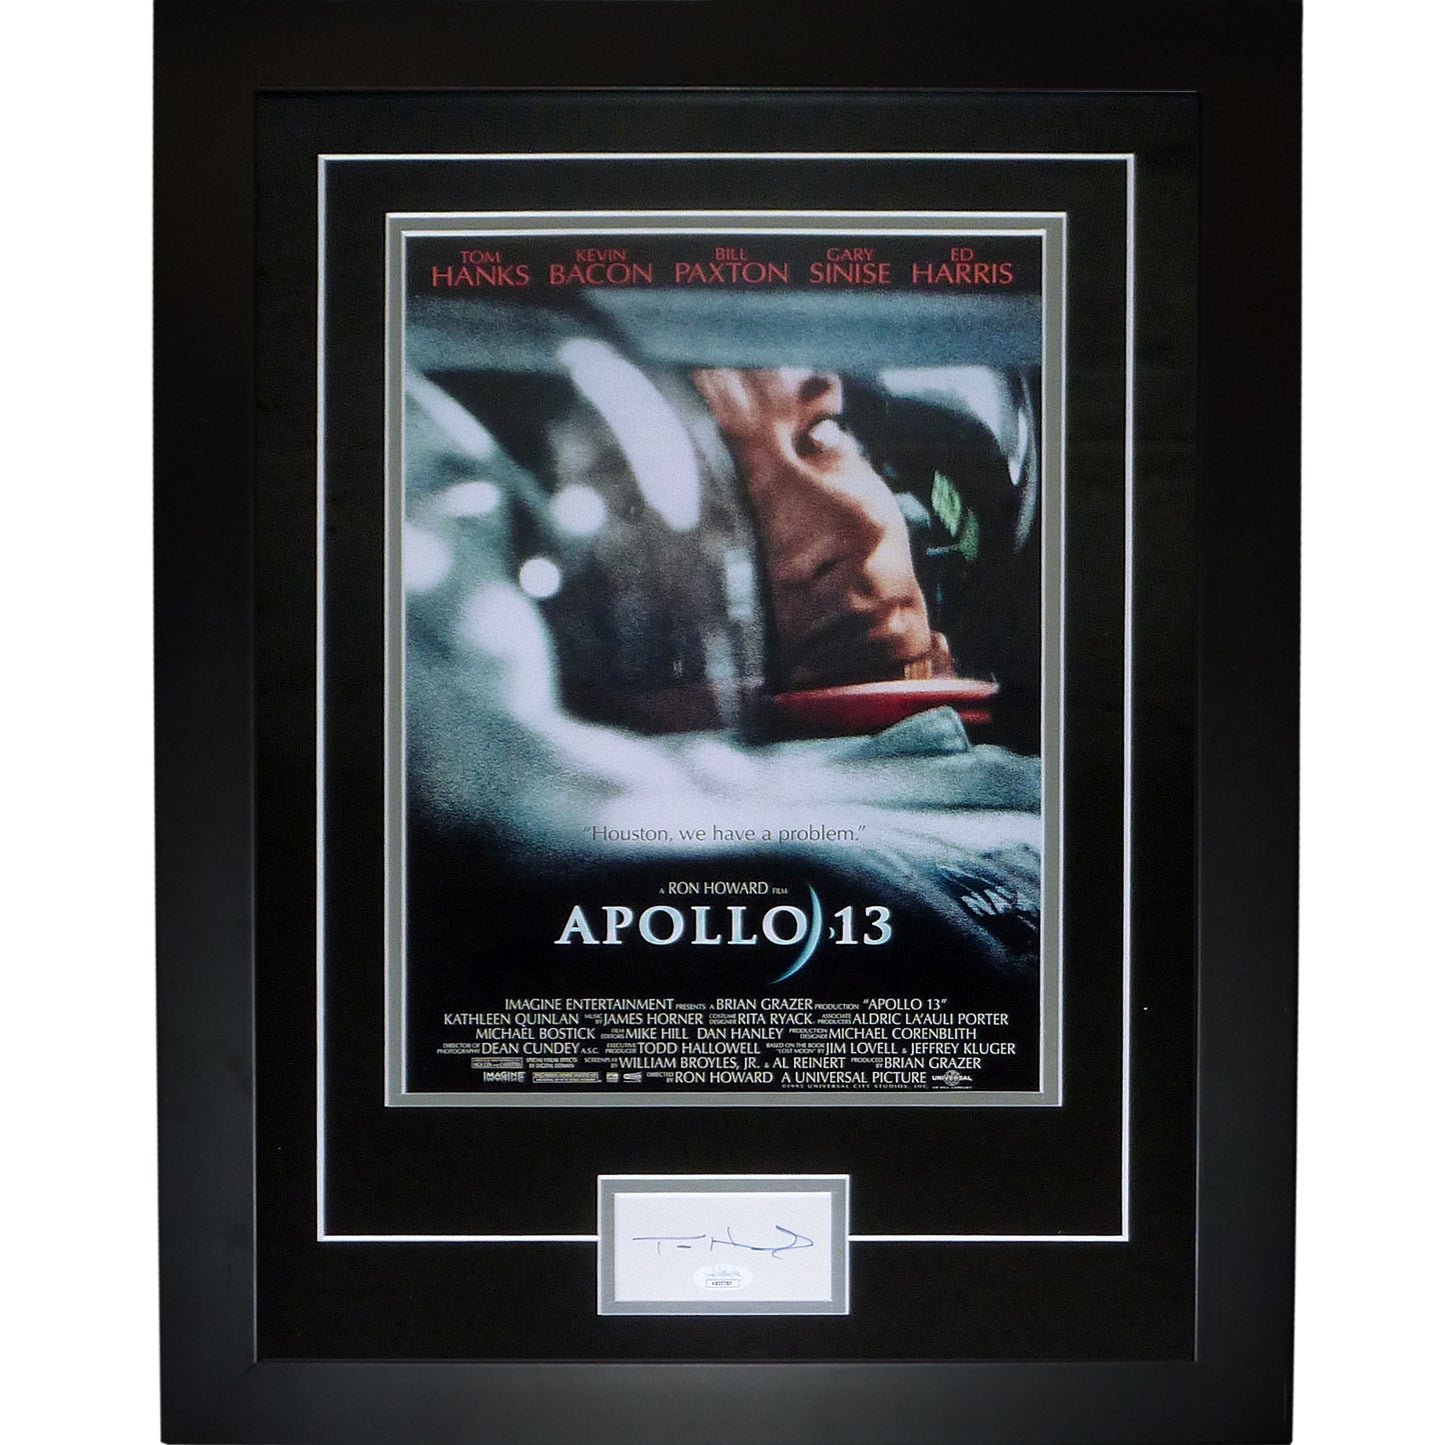 Apollo 13 11x17 Movie Poster Deluxe Framed with Tom Hanks Autograph - JSA